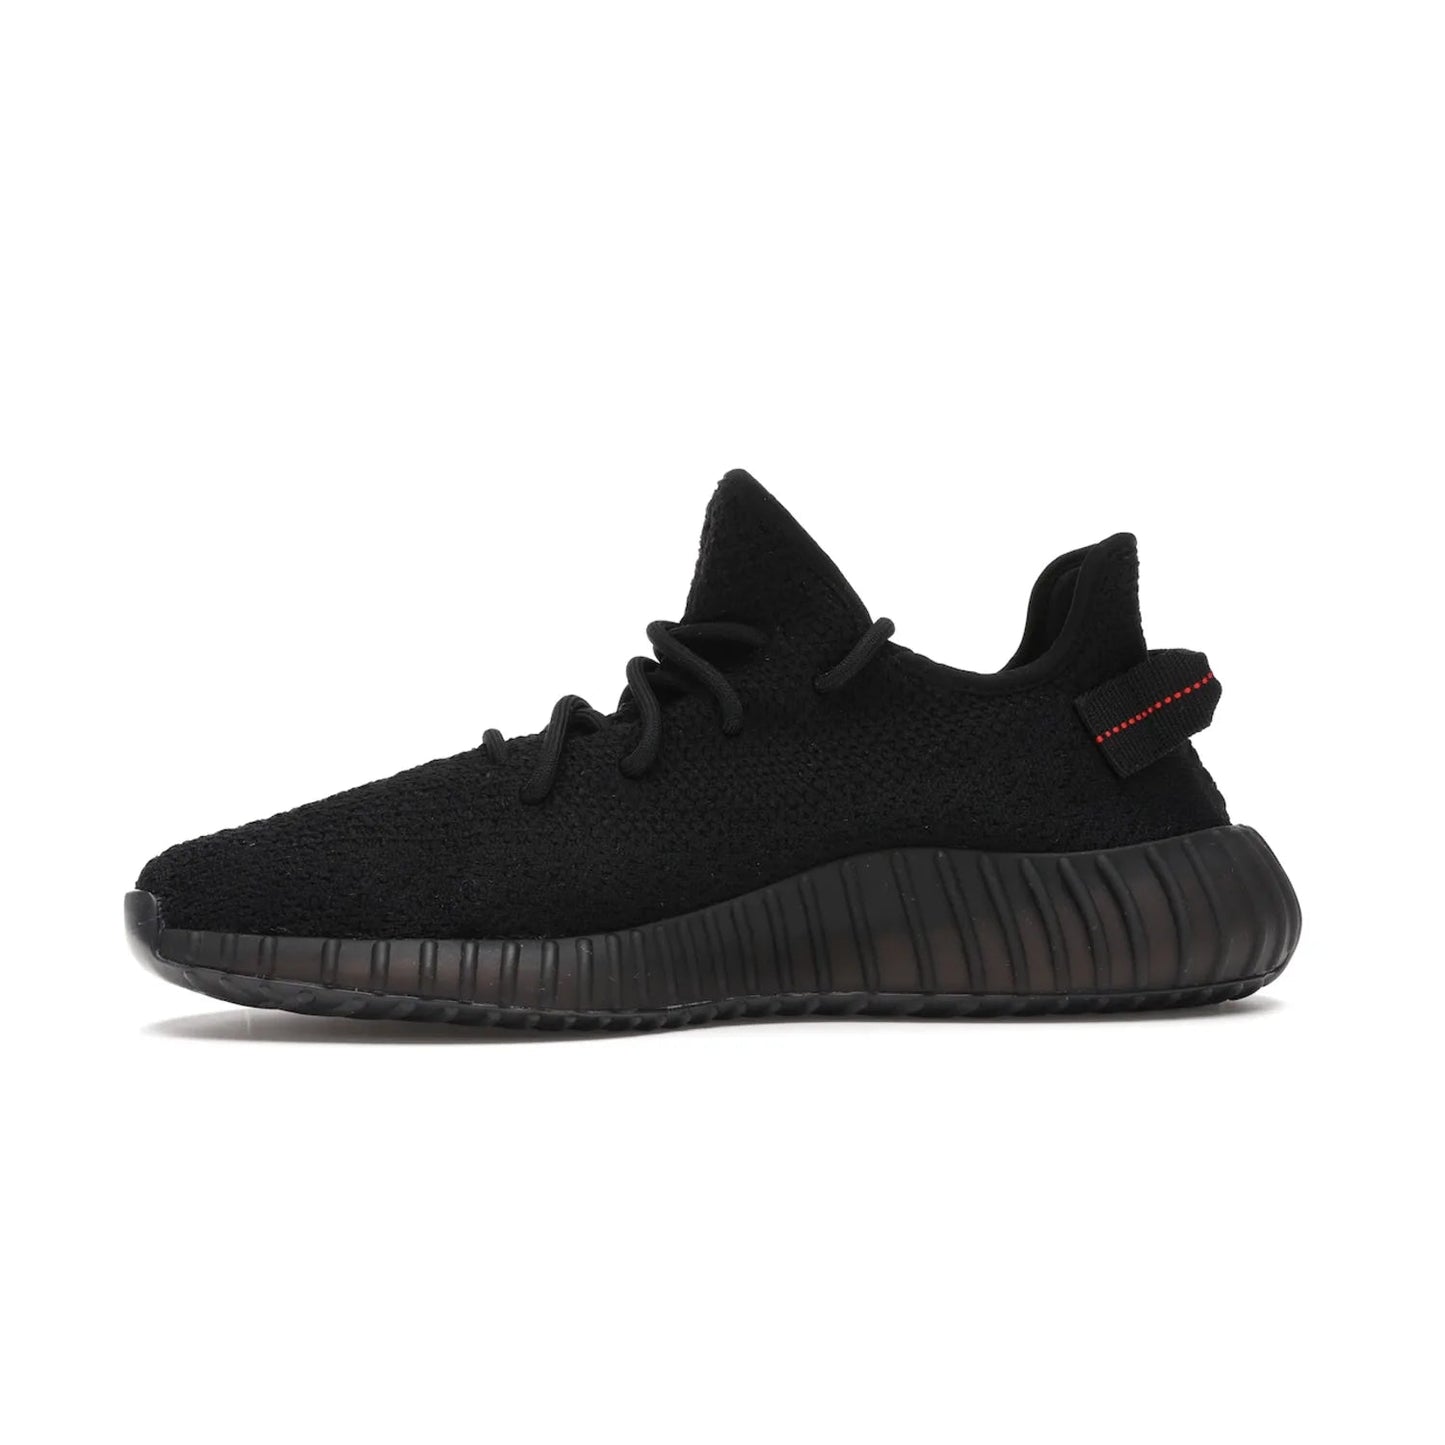 adidas Yeezy Boost 350 V2 Black Red (2017/2020) - Image 18 - Only at www.BallersClubKickz.com - Adidas Yeezy Boost 350 V2 Black Red: a classic colorway featuring black Primeknit upper, BOOST cushioning system, and iconic "SPLY-350" text. Released in 2017 for a retail price of $220.